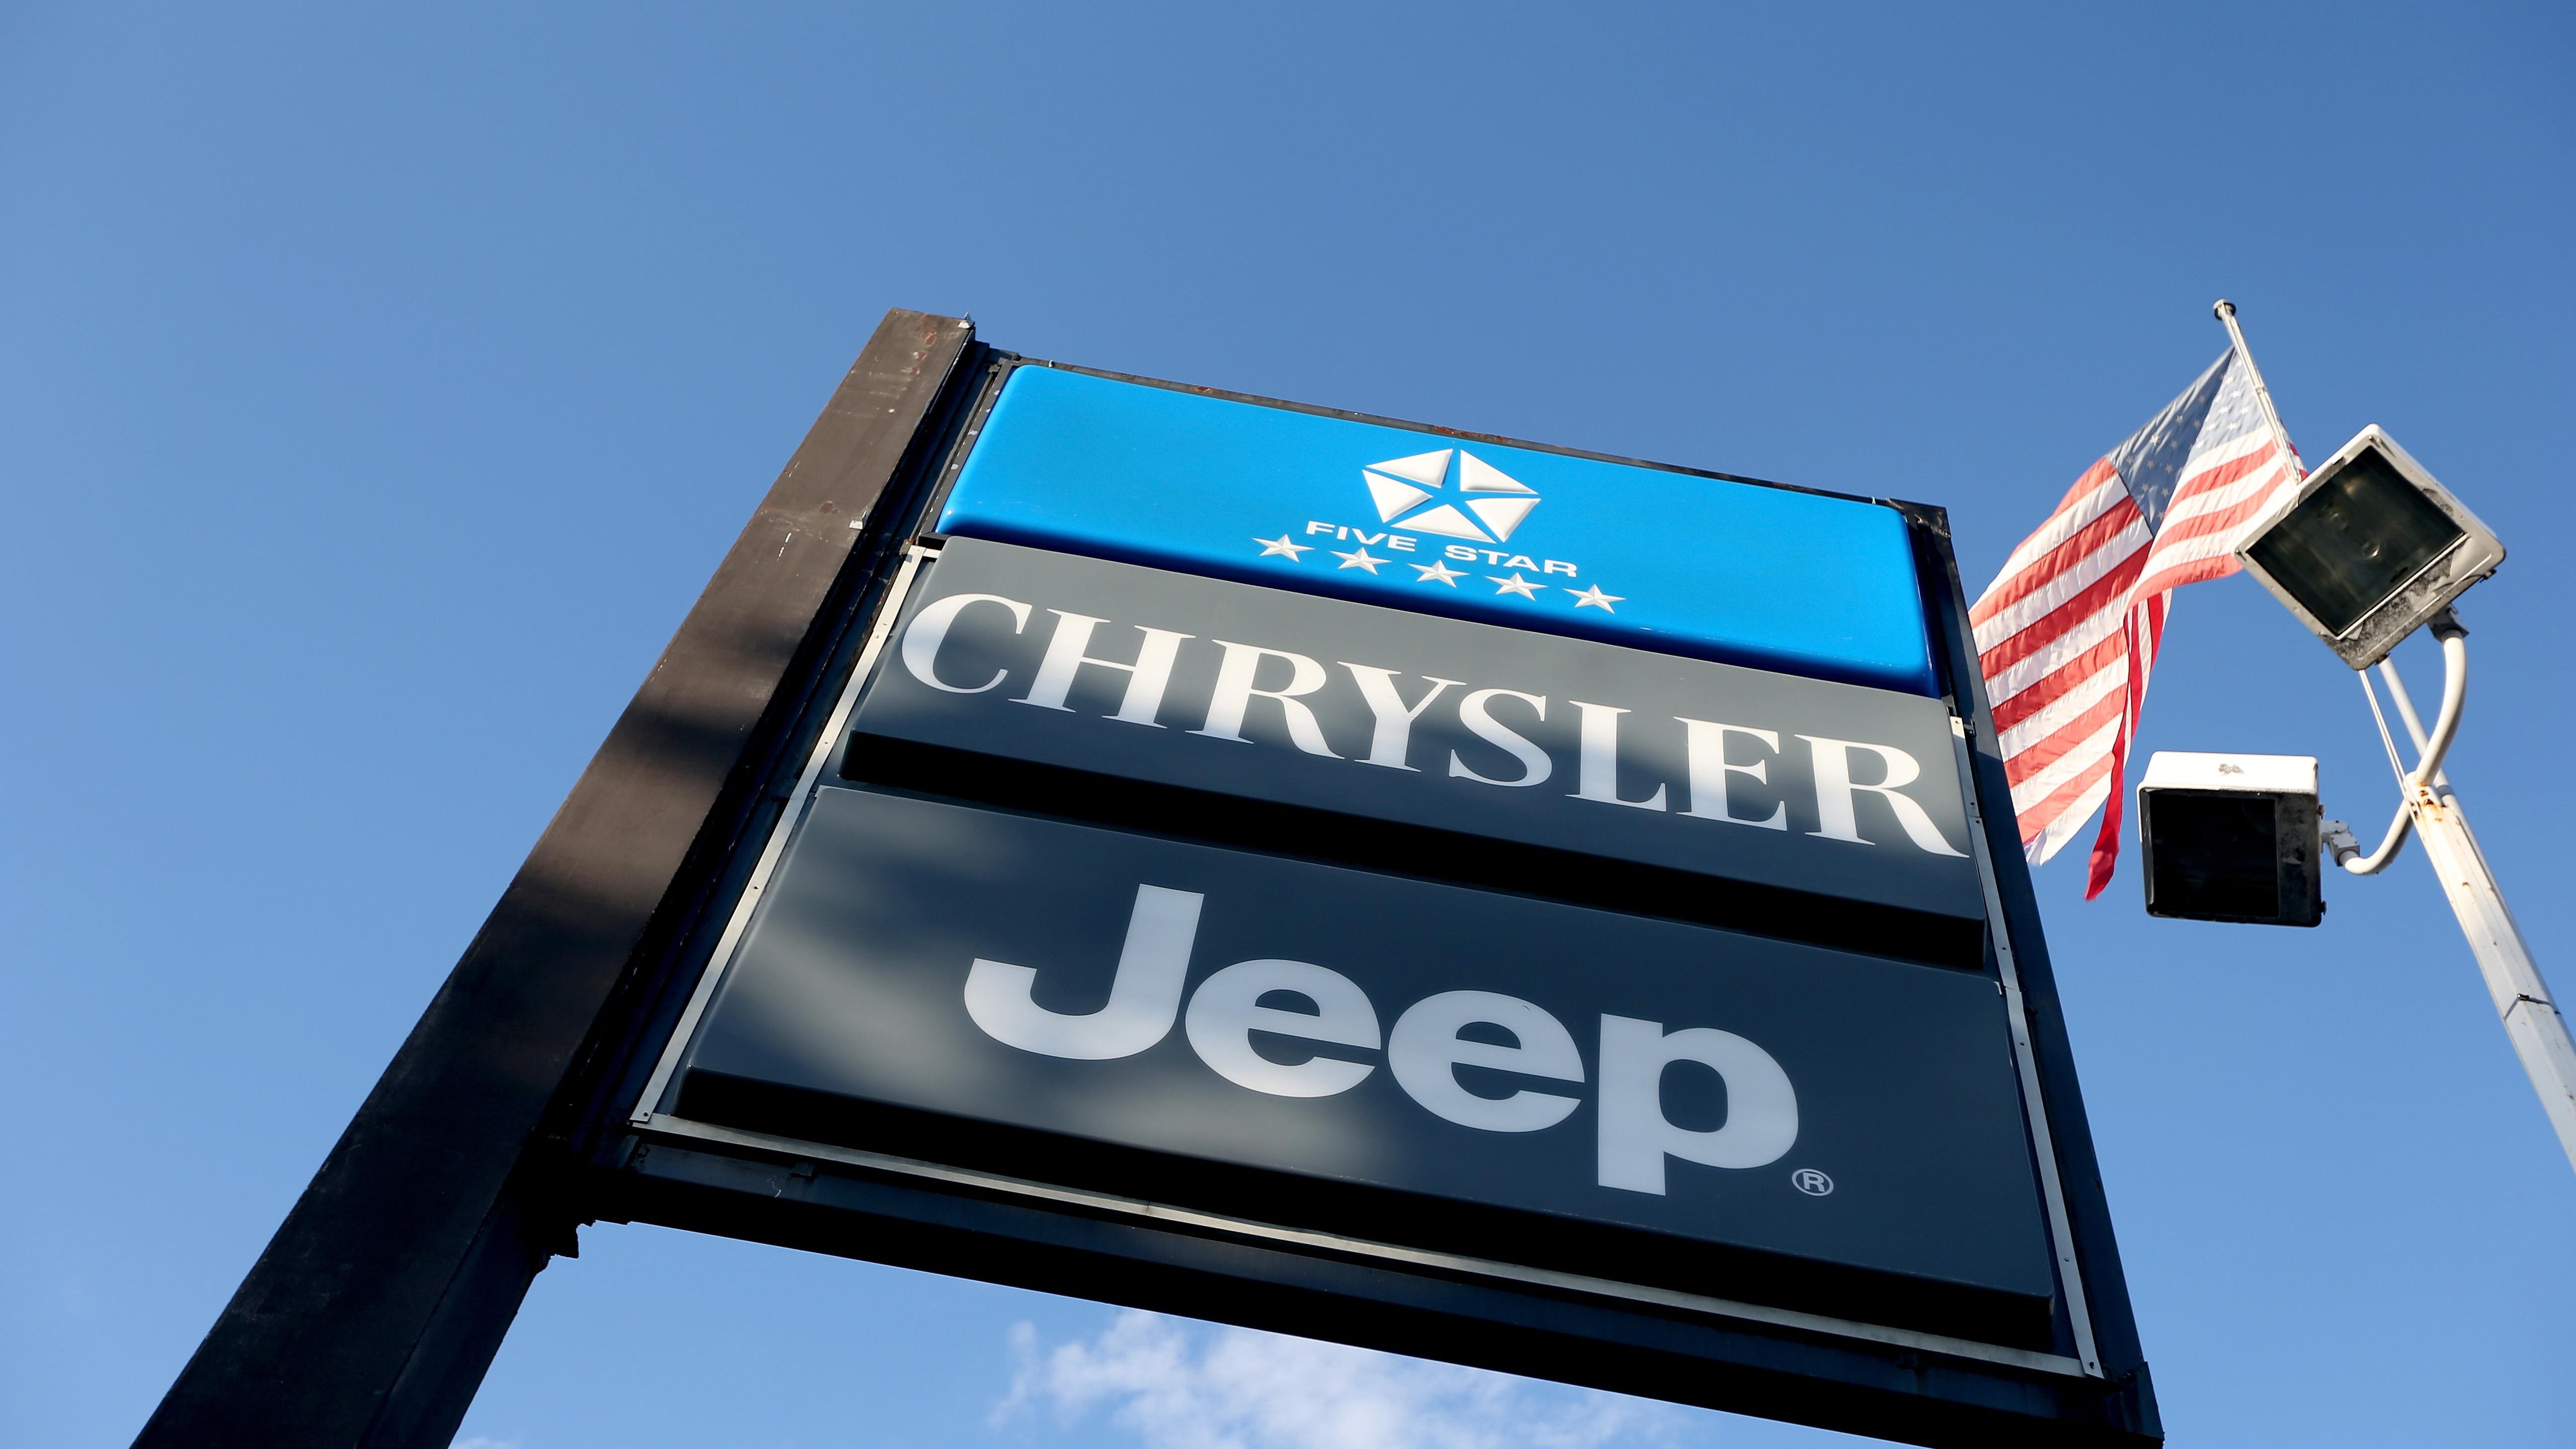 Fiat Chrysler Automobiles NV’s U.S. unit settled an antitrust lawsuit claiming the company pushed dealers to submit fraudulent sales numbers to prop up its share price.